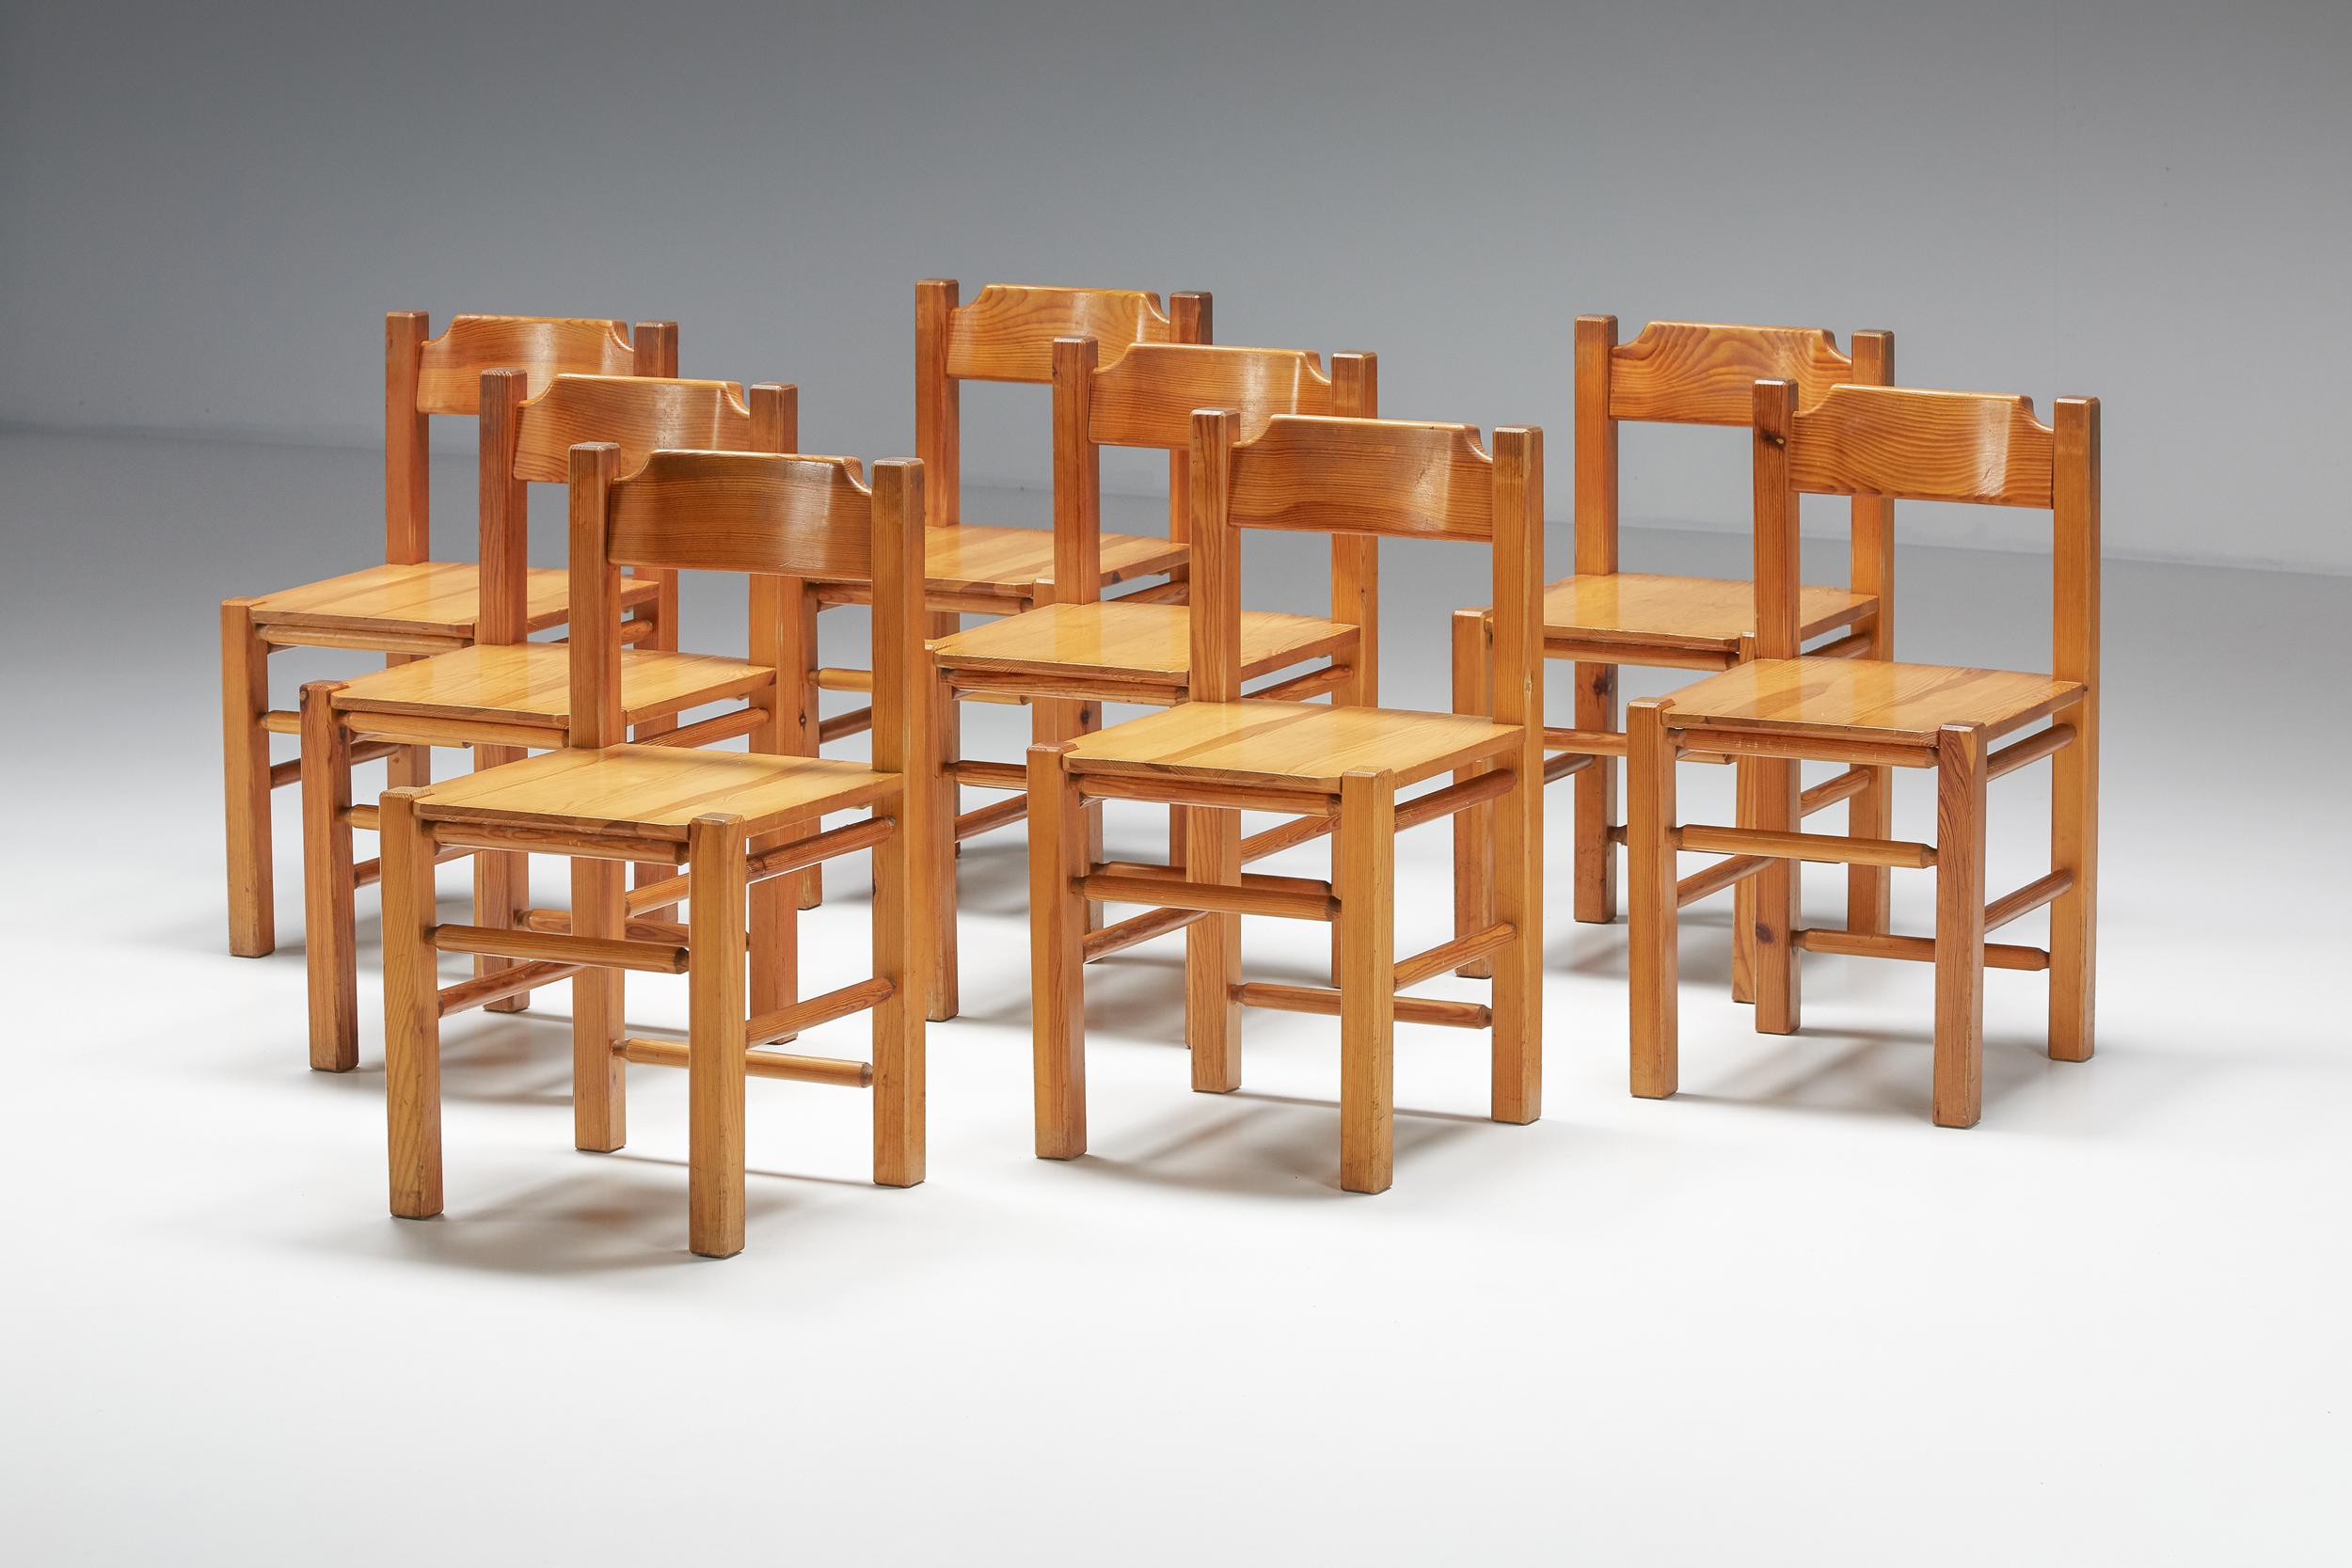 Charlotte Perriand Inspired Pine dining chairs, 1960s

These dining chairs were inspired by Charlotte Perriand circa 1960, manufactured in France in Pinewood. The characteristics of this set of chairs are similar to the furniture designs of